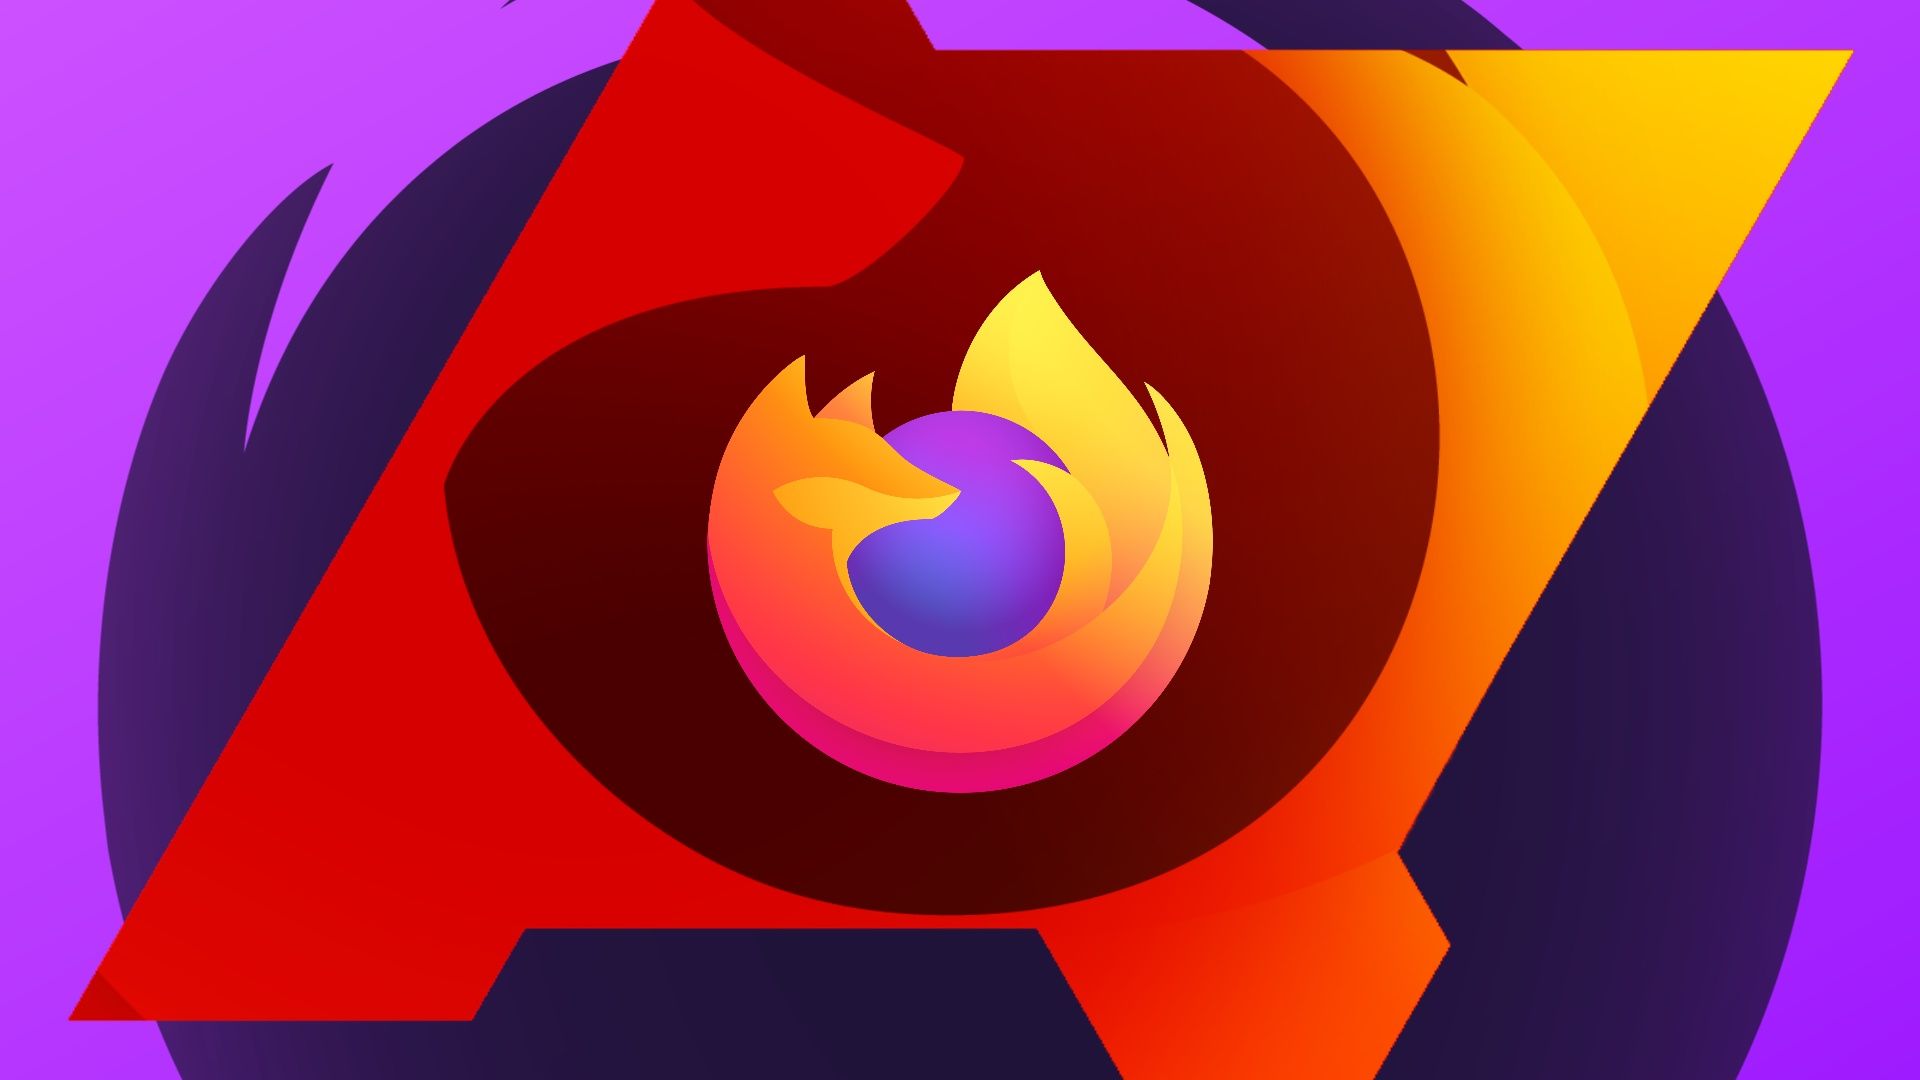 Mozilla blames Google's lock-in practices for Firefox's demise